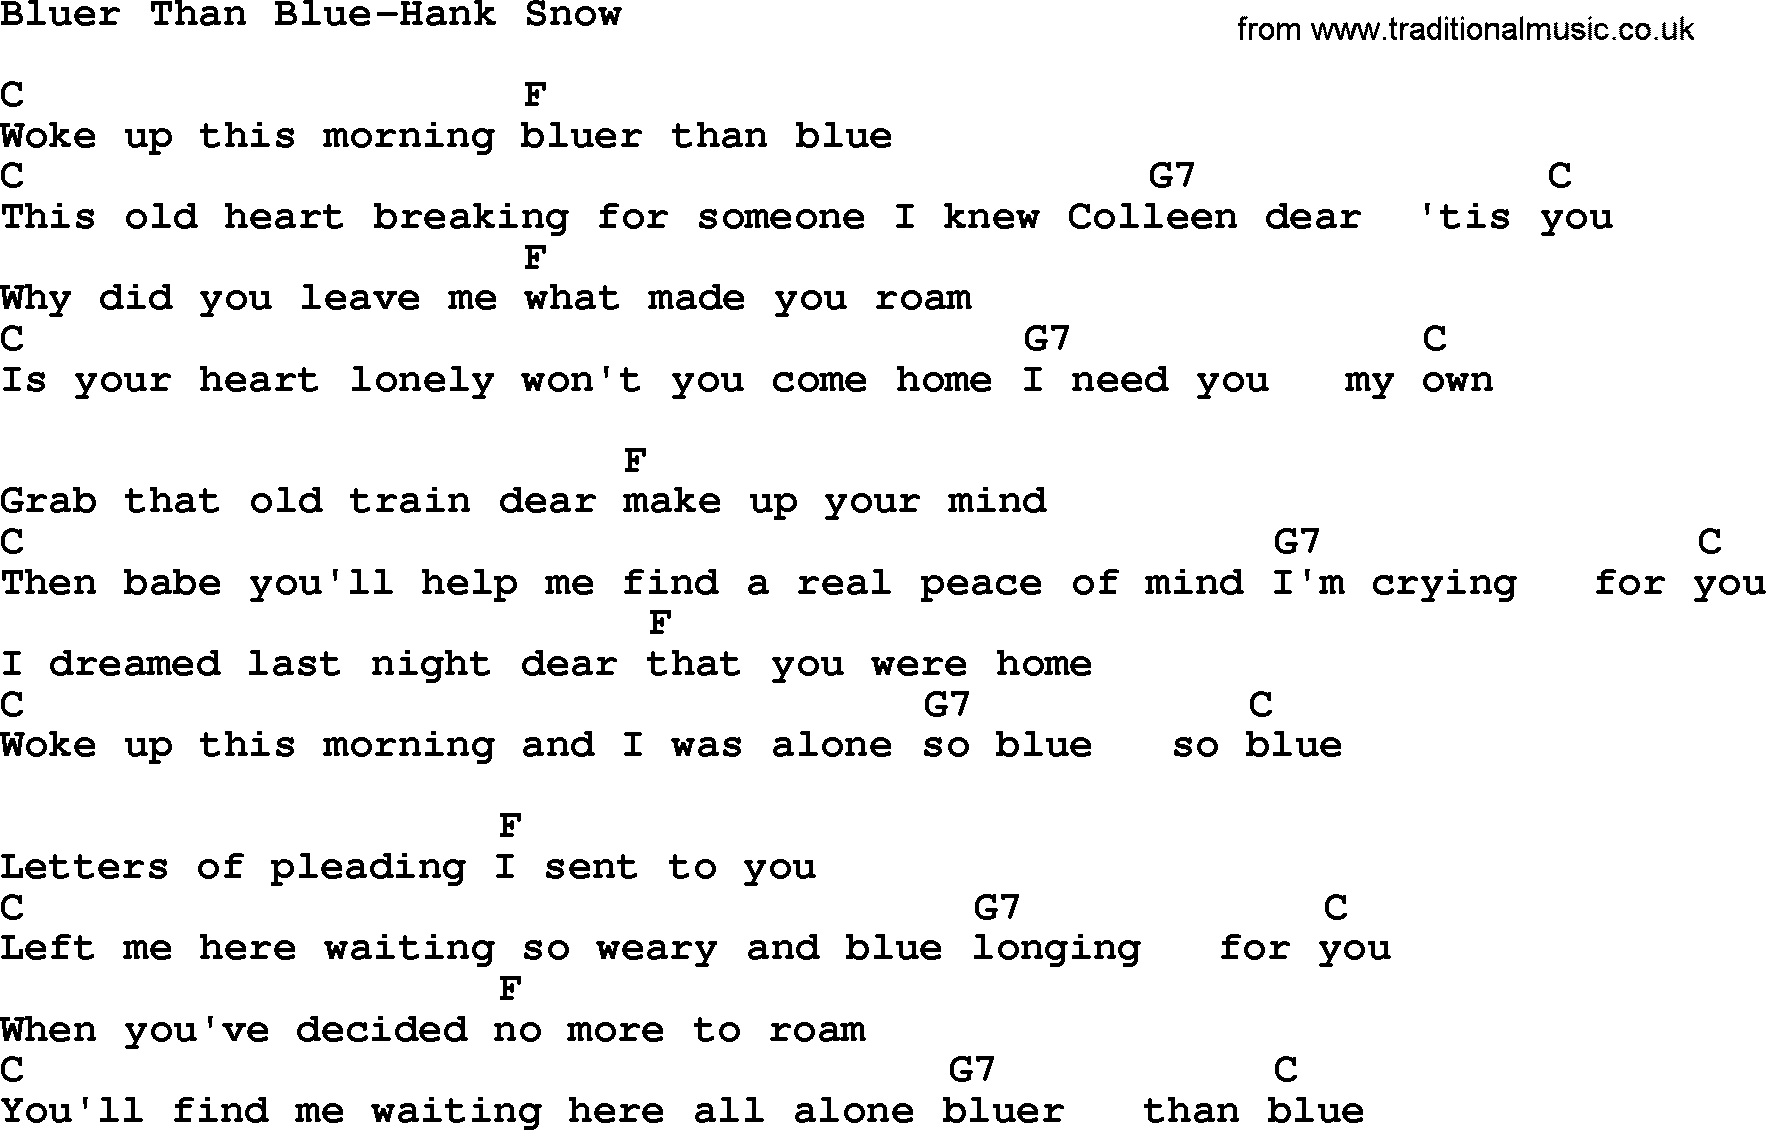 Country music song: Bluer Than Blue-Hank Snow lyrics and chords